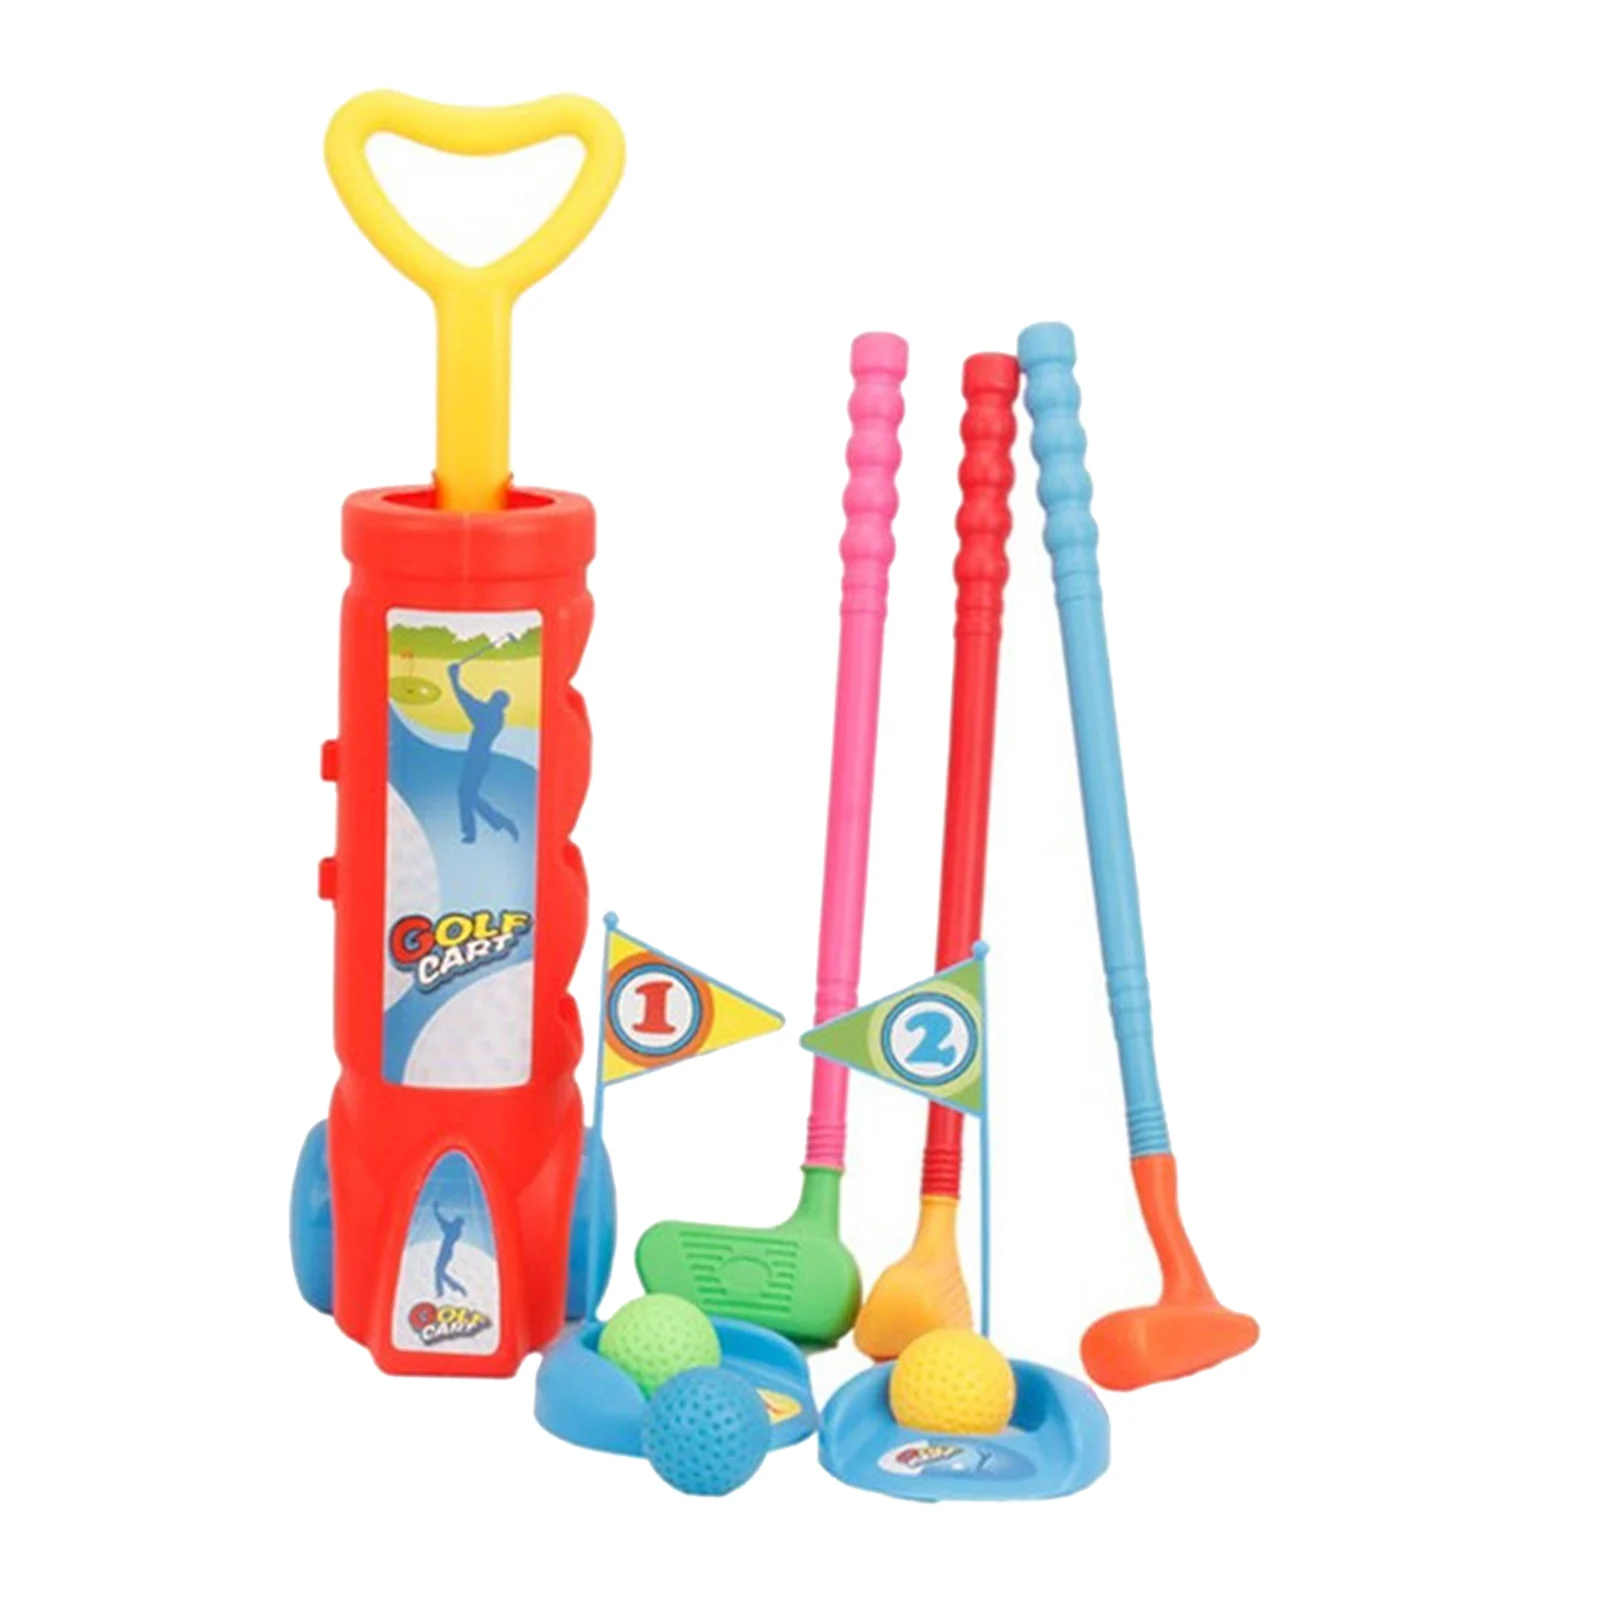 Children Kids Outdoor Sports Games Toys Multicolor Plastic Mini Golfer Club Set Toddler Educational Outdoors